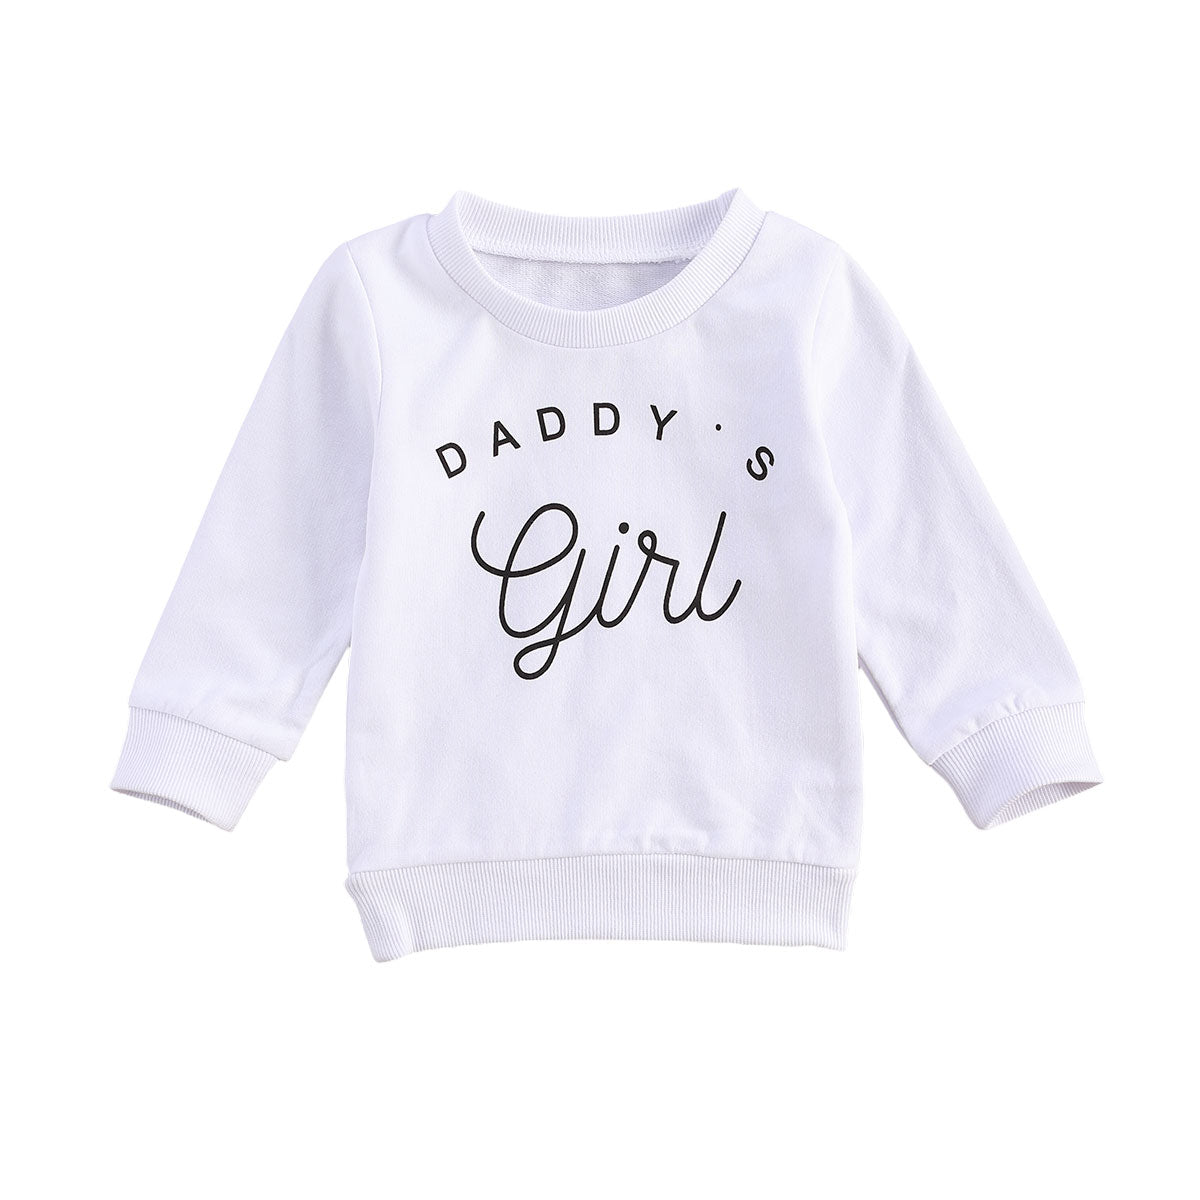 Daddy's Girl Top - Bubba Kids white / 2T / United States